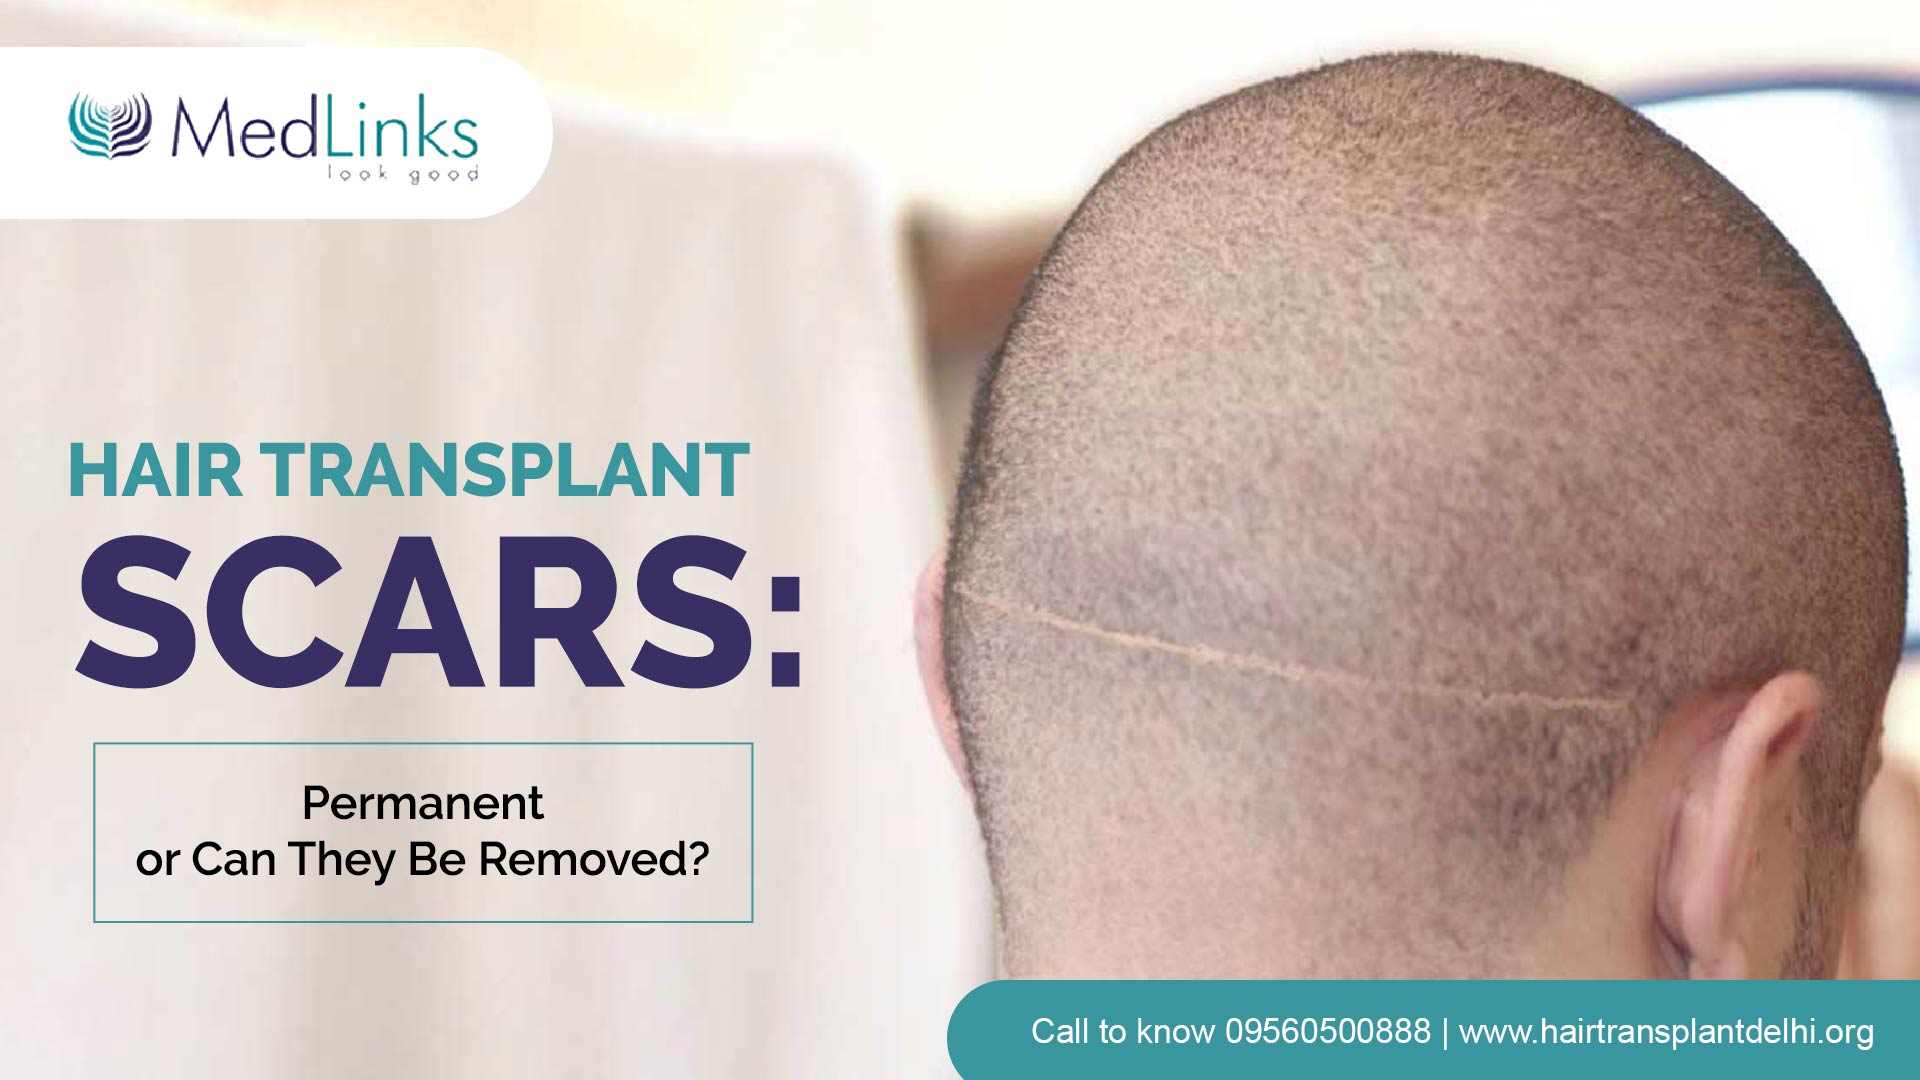 Hair Transplant Scars: Permanent or can they be removed? | MedLinks